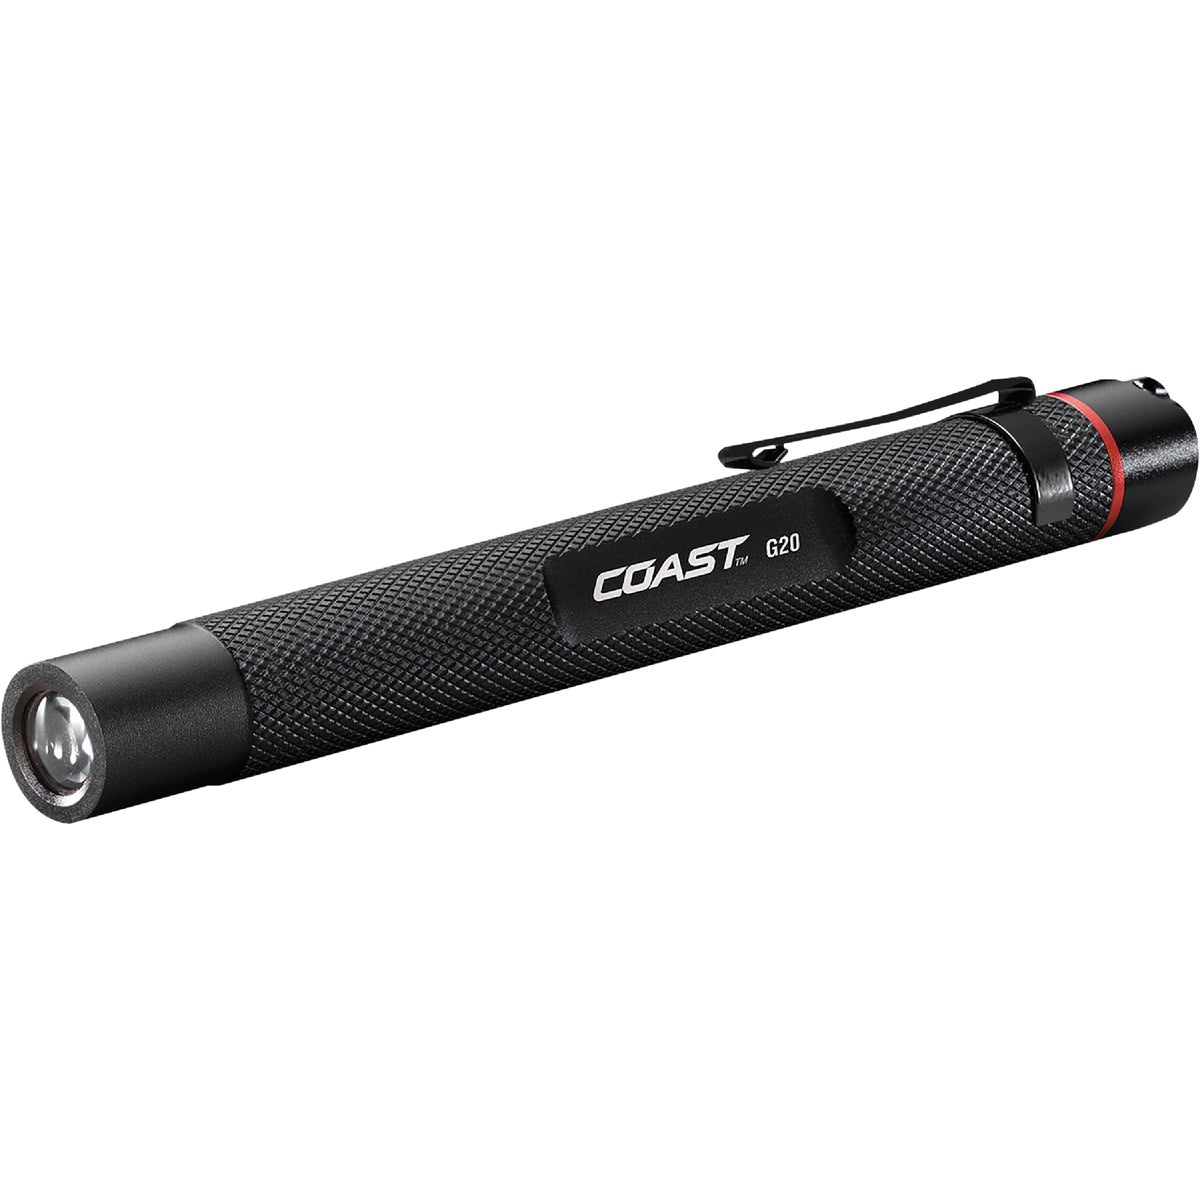 Item 805677, The G20 penlight features Coast's legendary Inspection Beam, prized for its